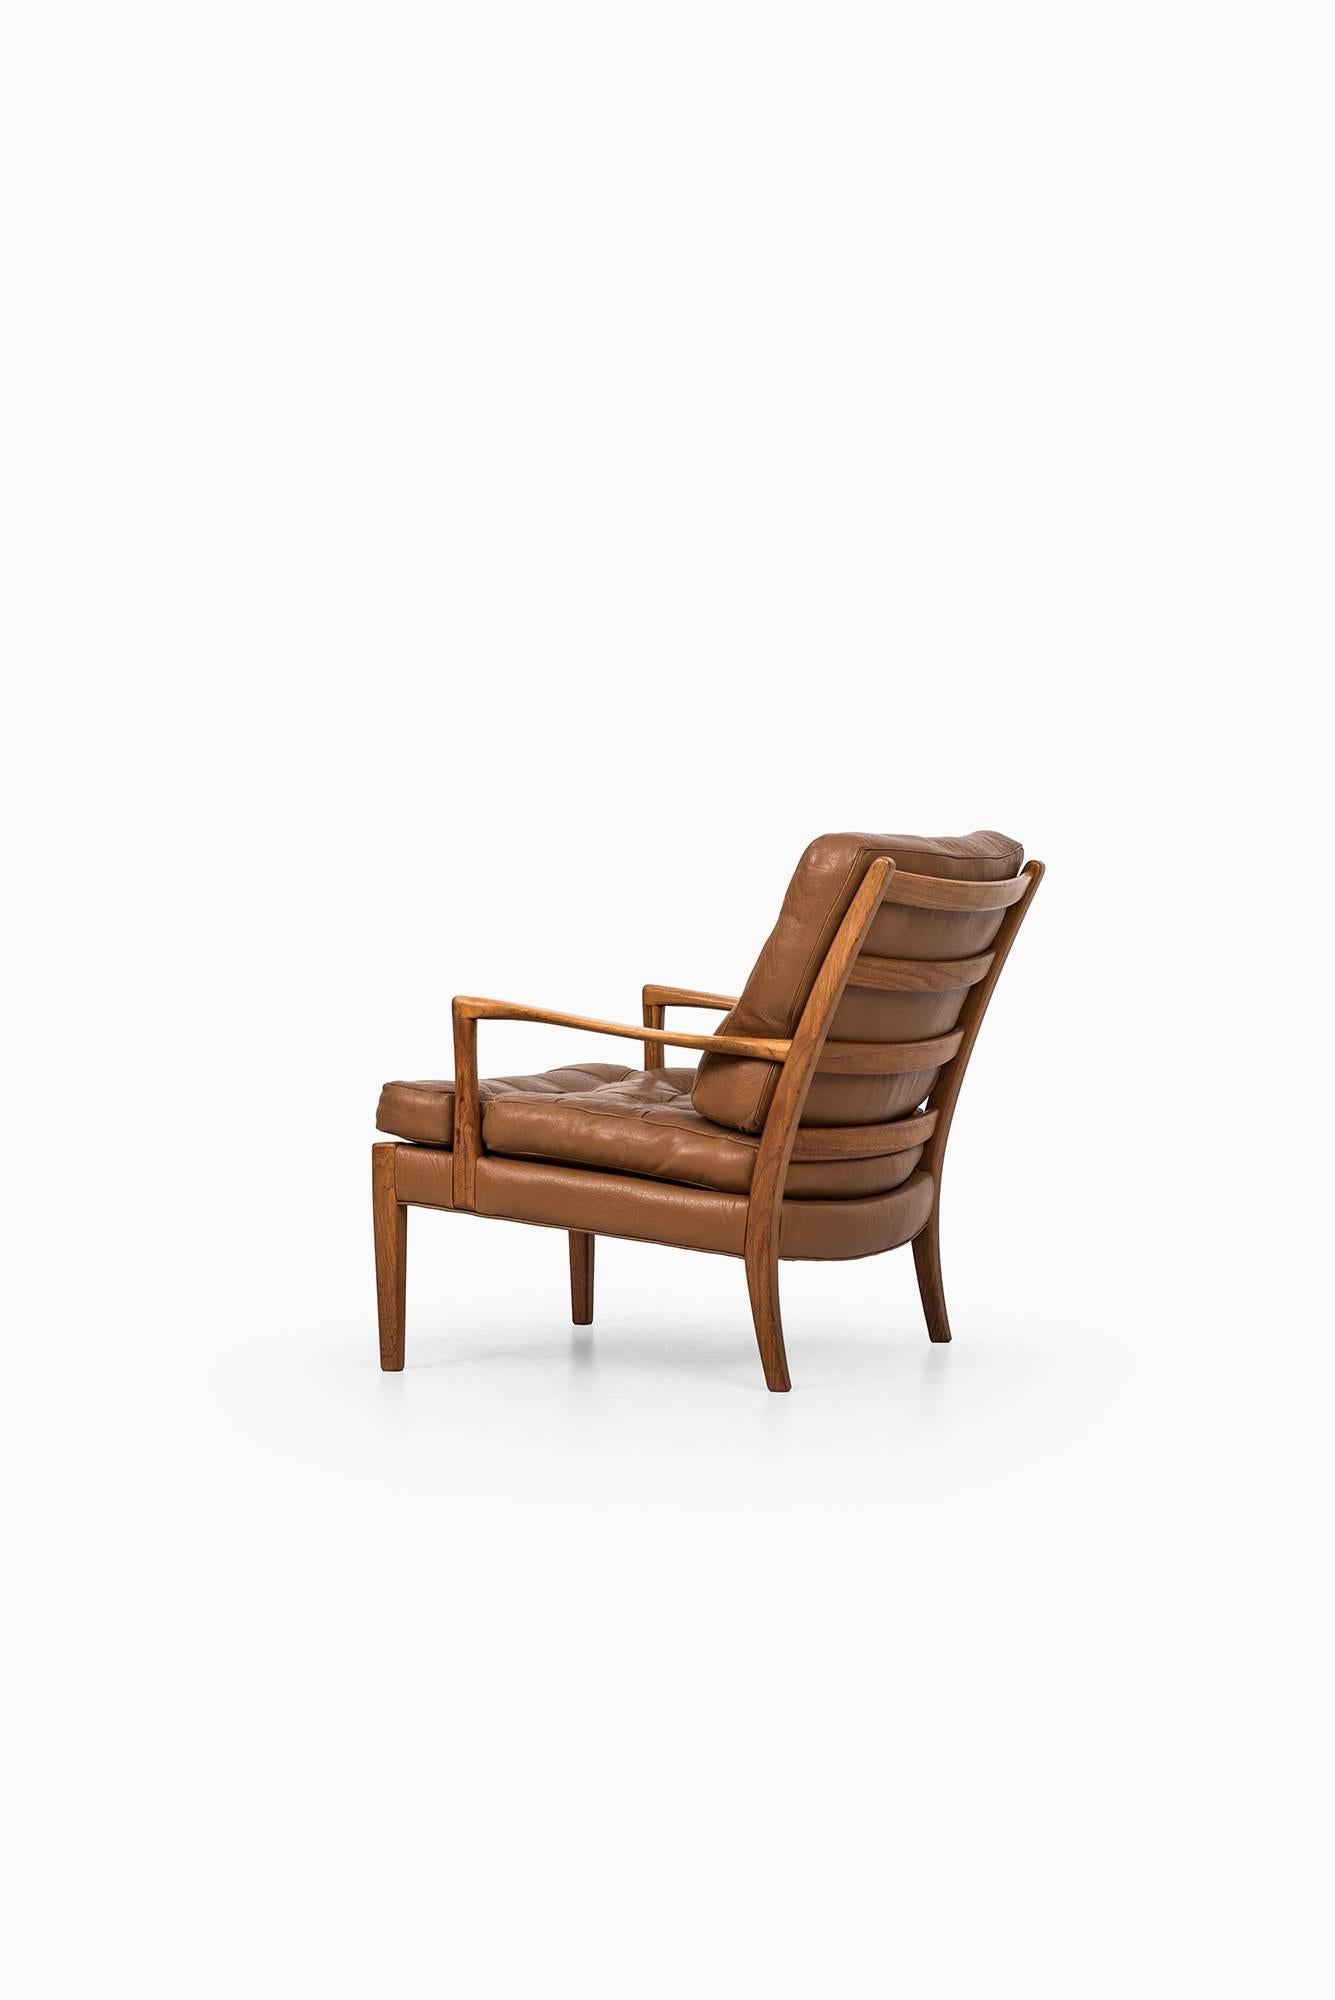 Swedish Arne Norell Easy Chair Model Löven by Arne Norell AB in Sweden